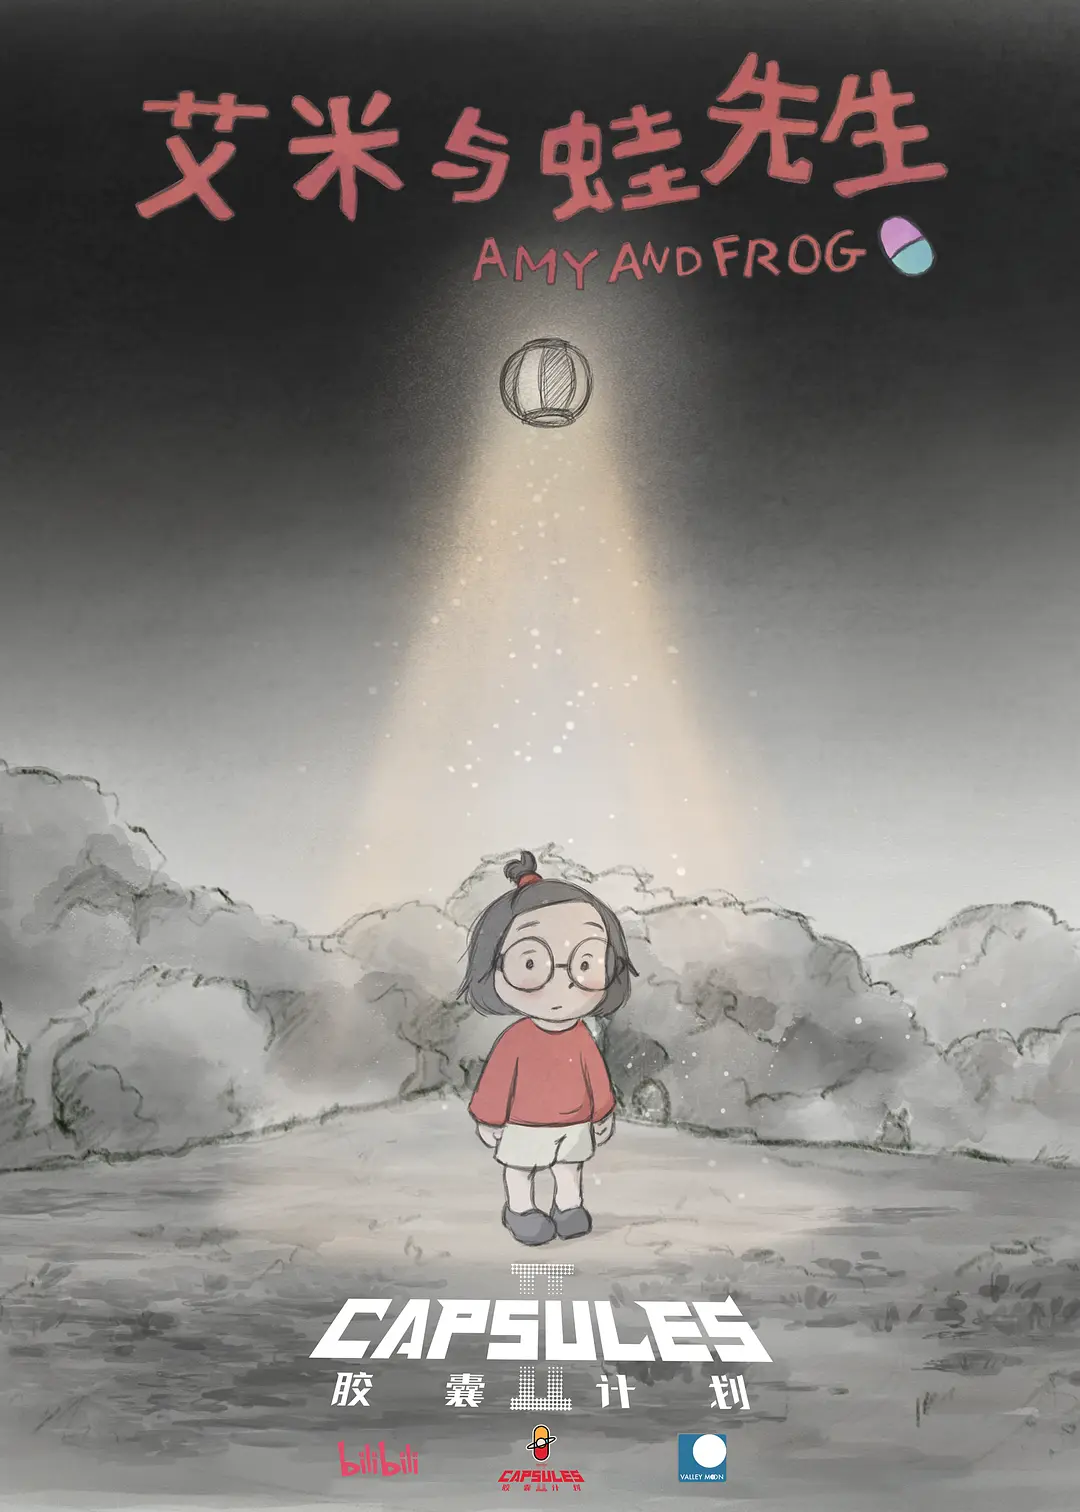 Amy And Frog Episode 13